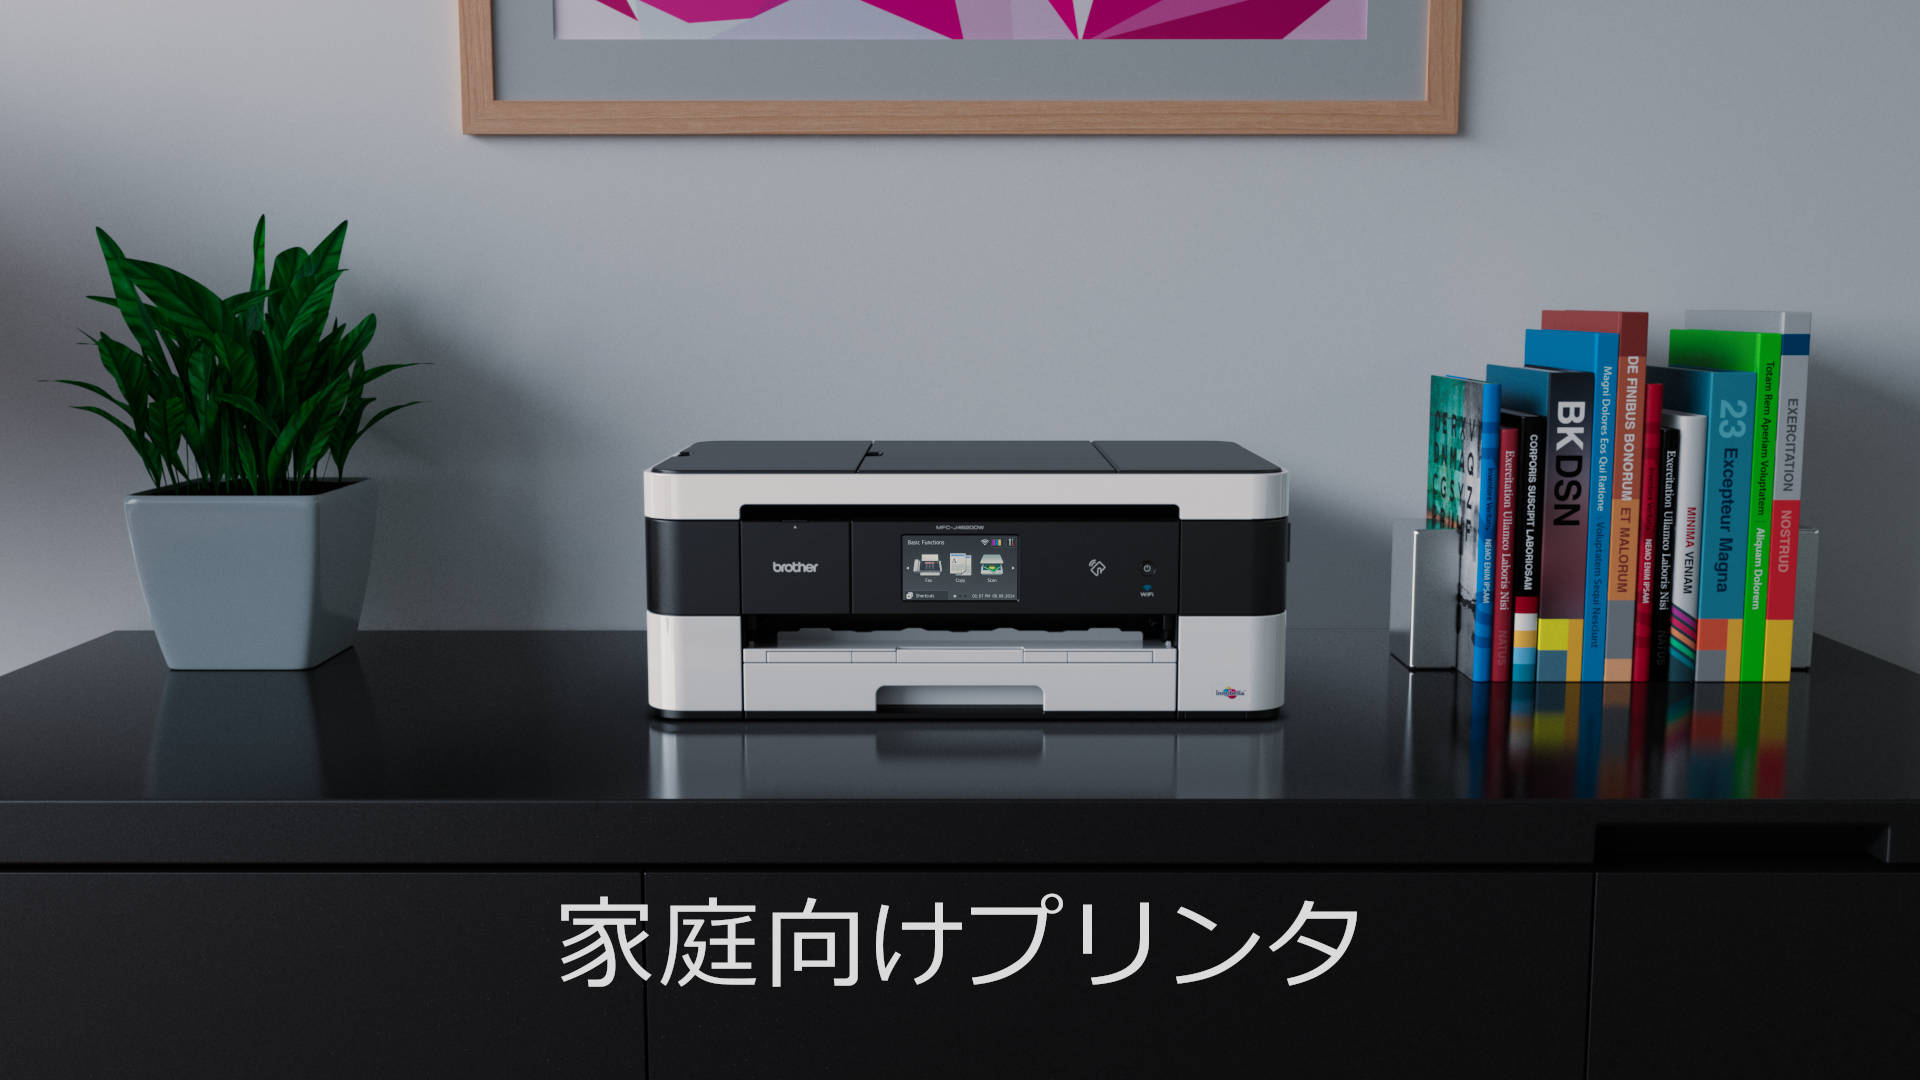 Brother printer on a cabinet in a home office regionalized for japan.